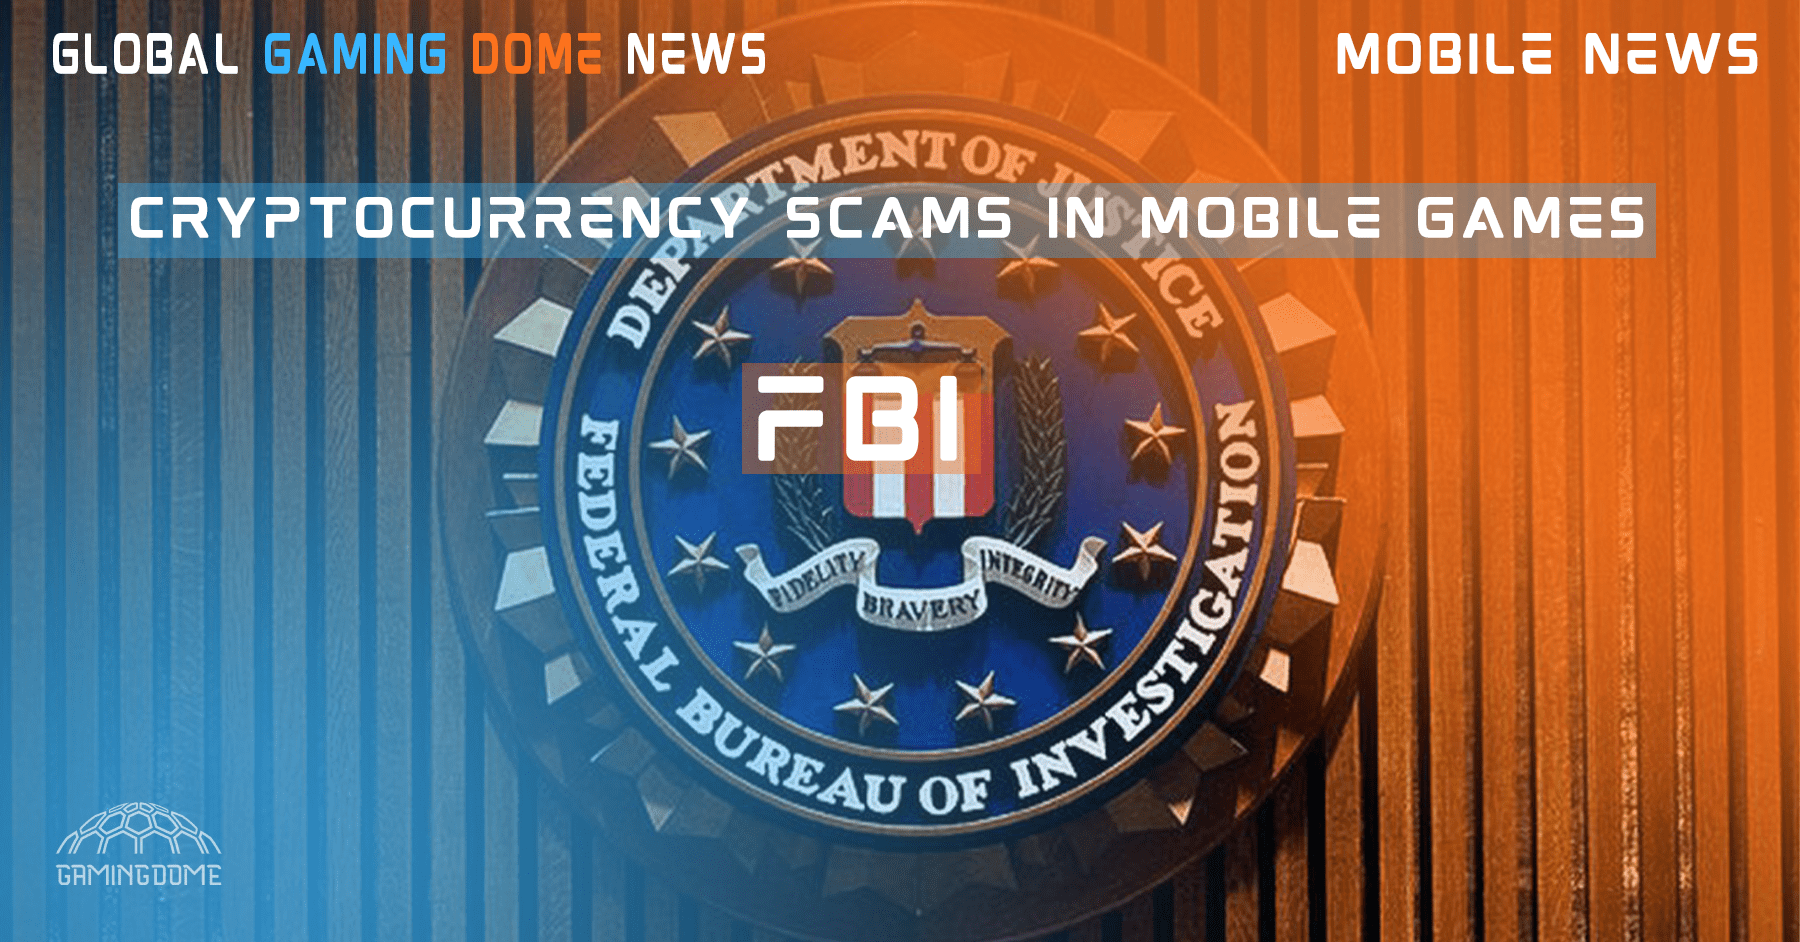 FBI warns of cryptocurrency scams in mobile games